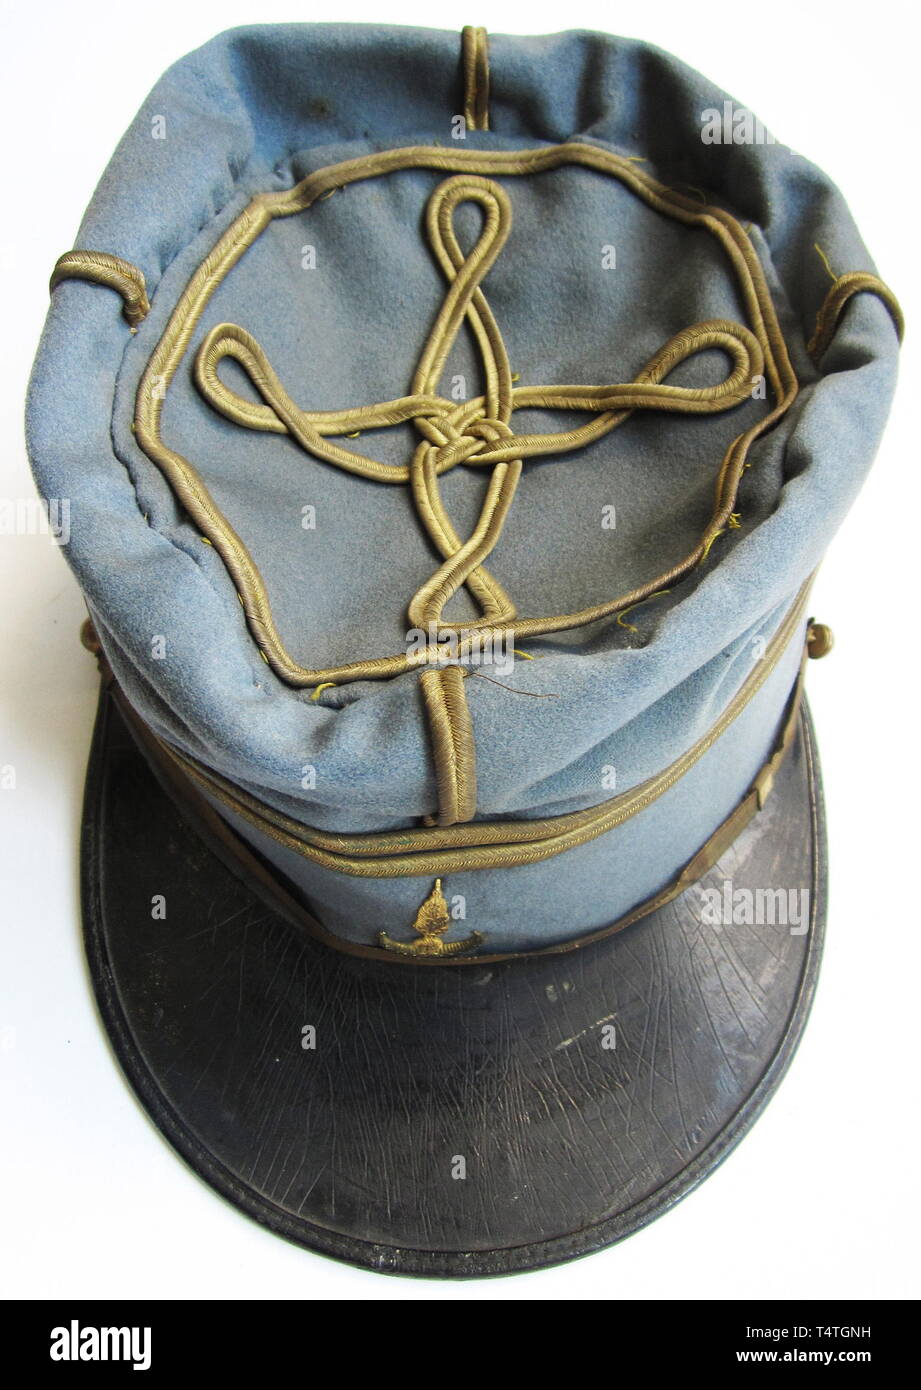 A Kepi Group for the Compagnies Sahariennes. A soft-top kepi for a lieutenant of Affaires Indigènes, (Native Affairs) 1900. Fine light blue cloth with two gold rank stripes around upper top and on vertical crown seams, and a single-looped Hungarian knot. Gold piping on crown edge. Braided wire chinstrap with two smooth gold buttons. A pressed metal badge of imitation bullion, grenade and crescent (modern a 20th century, Additional-Rights-Clearance-Info-Not-Available Stock Photo